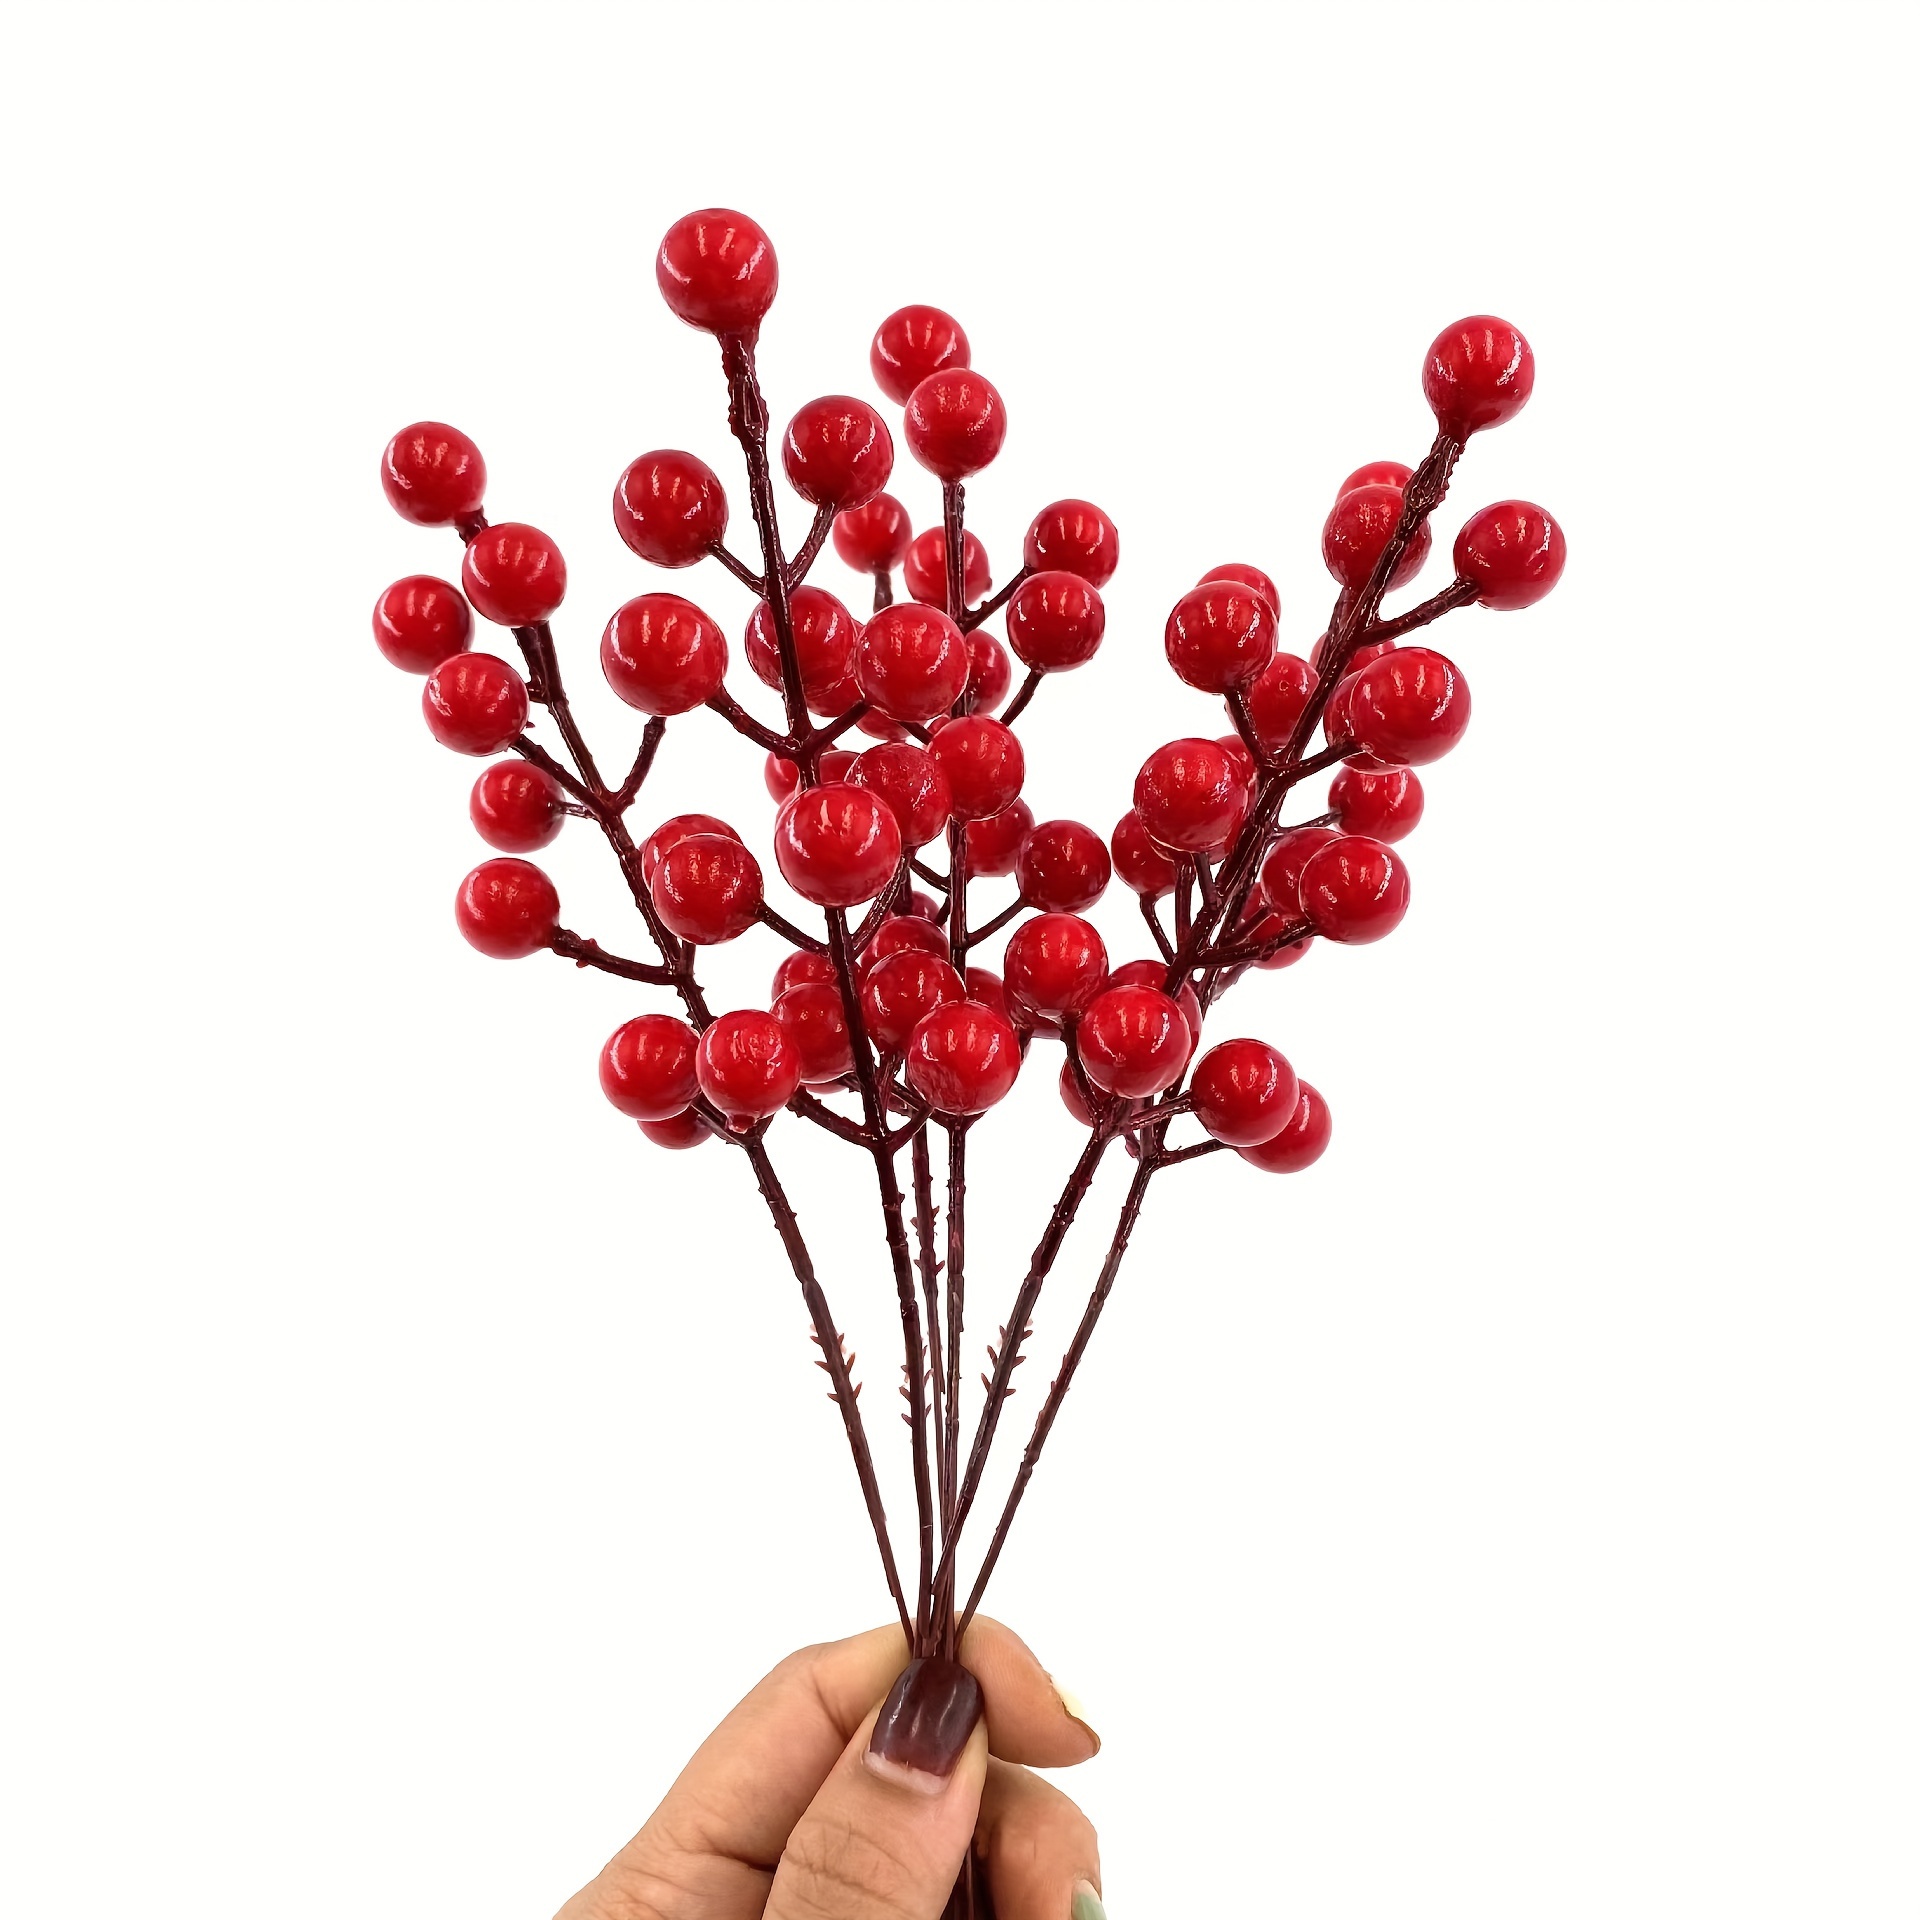 12Pcs Red Berry Stems Foam Red Berries Red Berries Stems Christmas